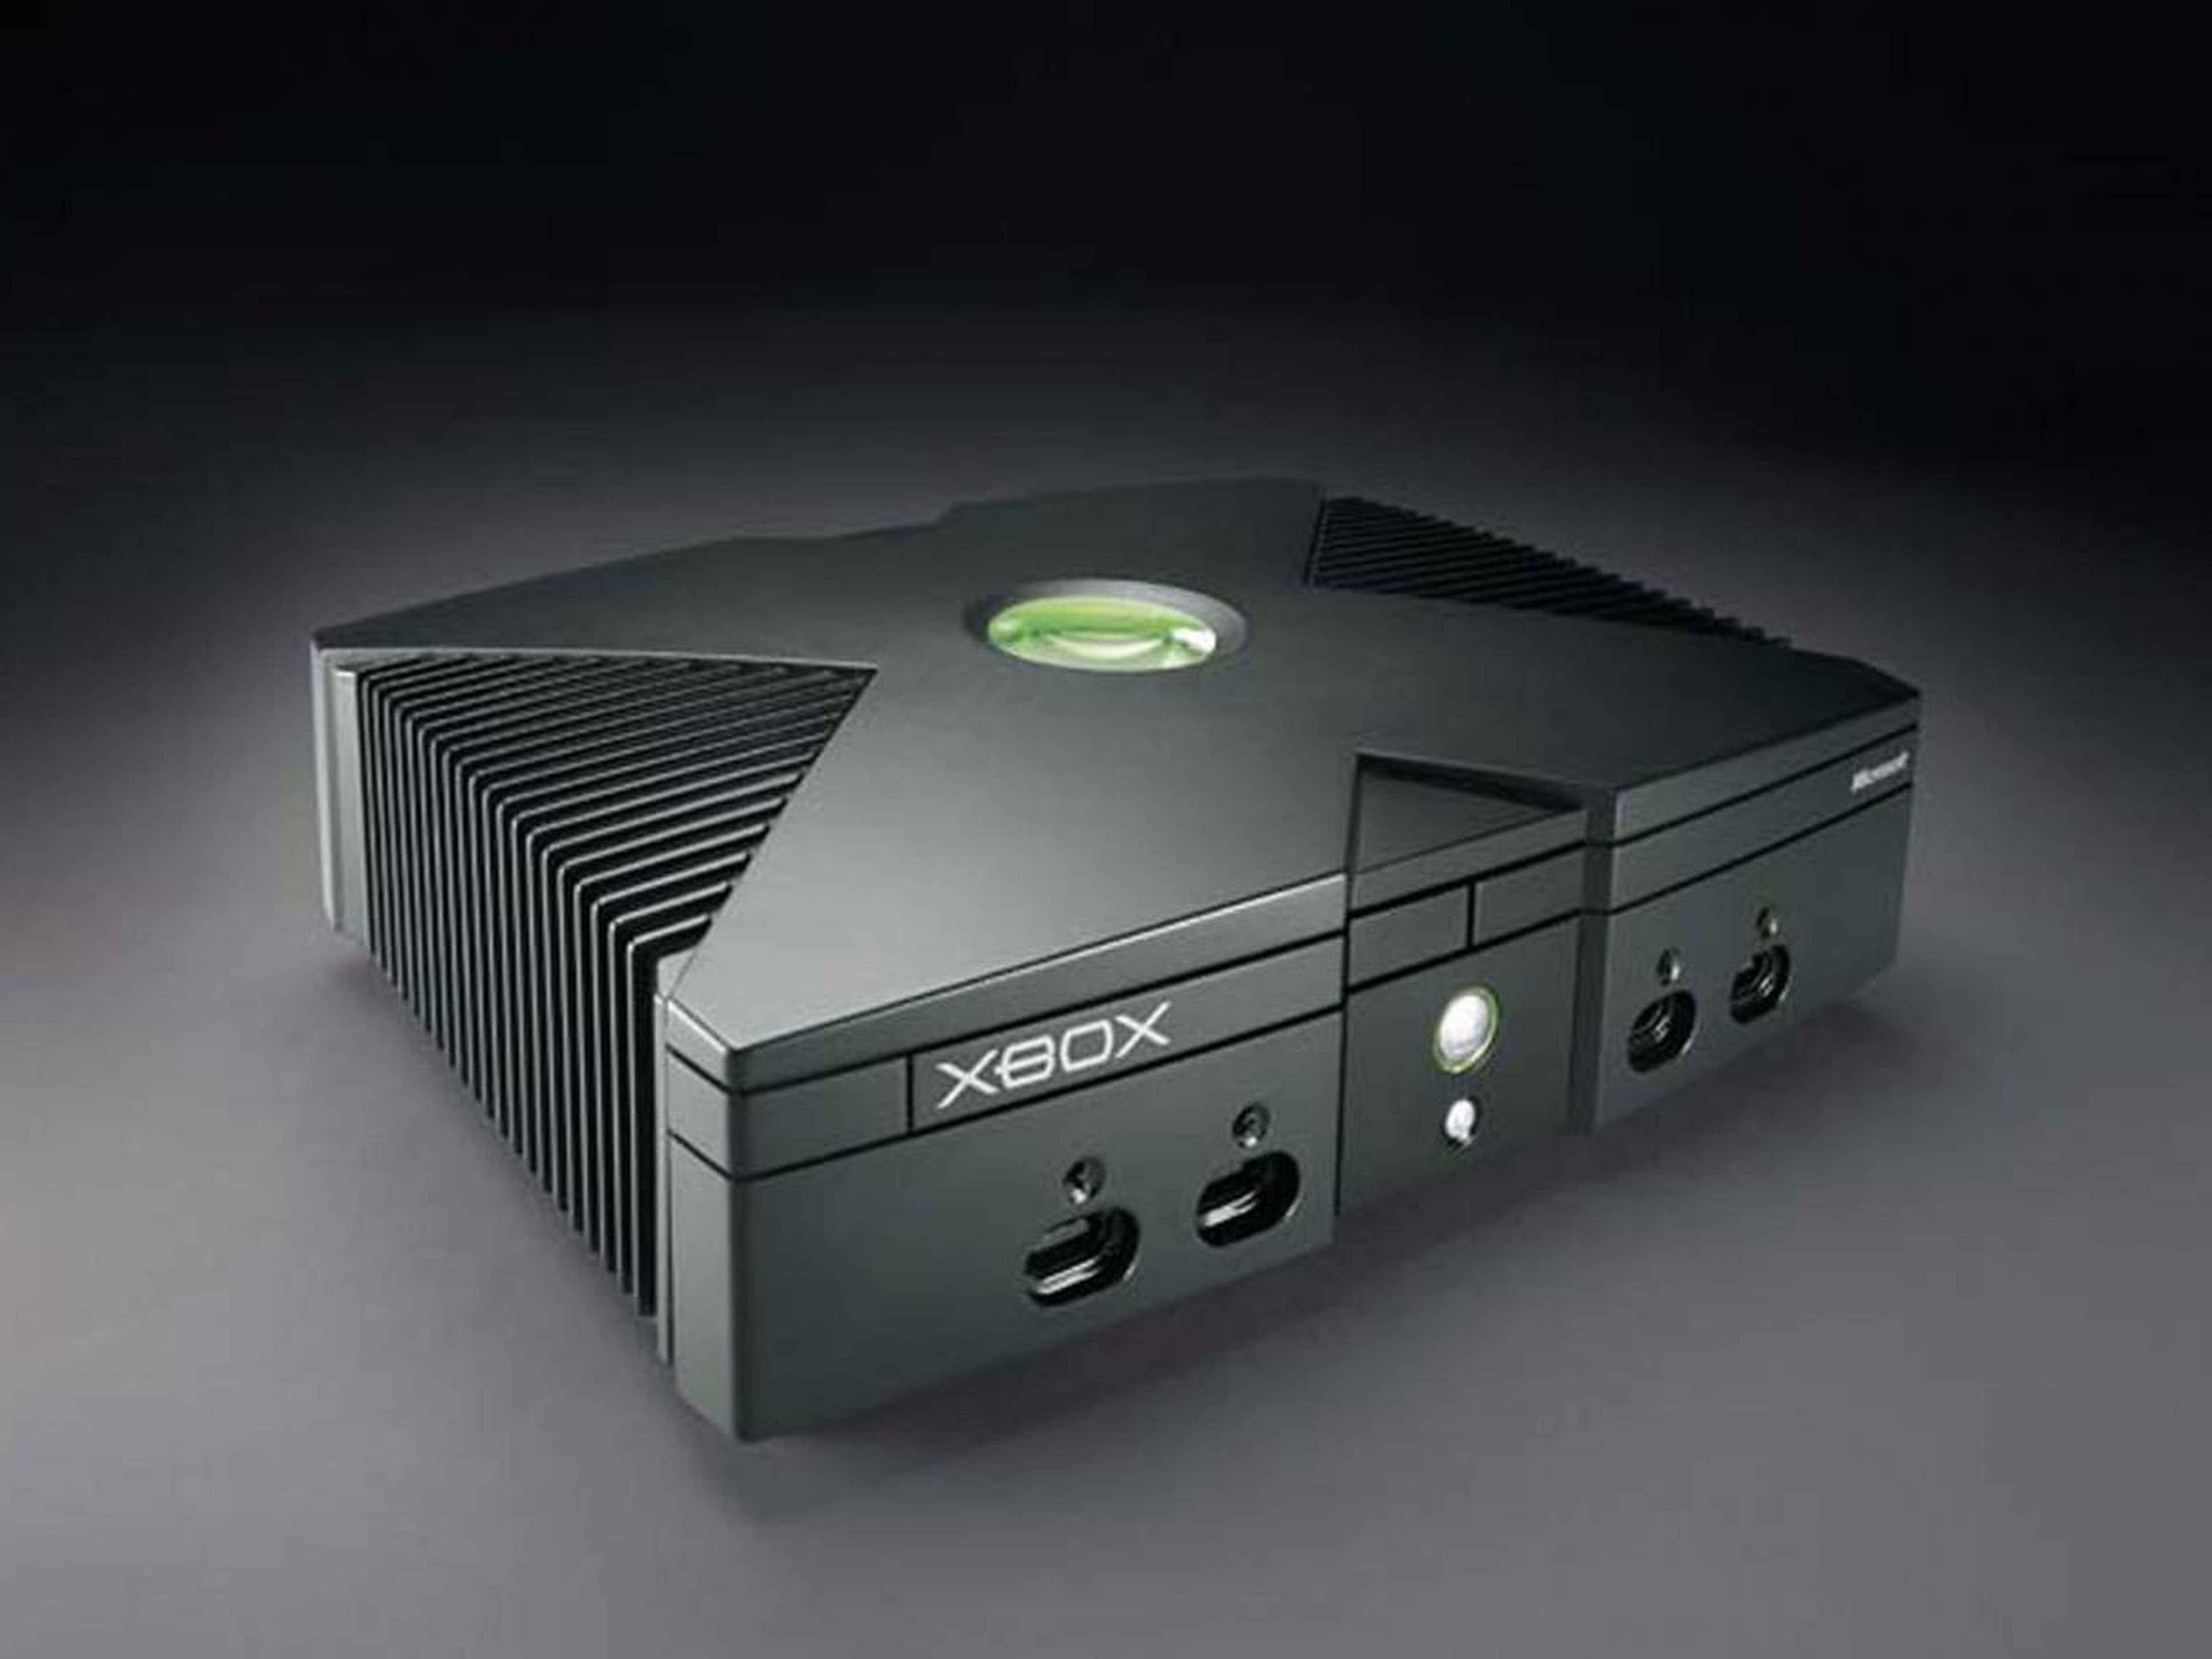 Microsoft jumped into the gaming console market in 2001 with Xbox.